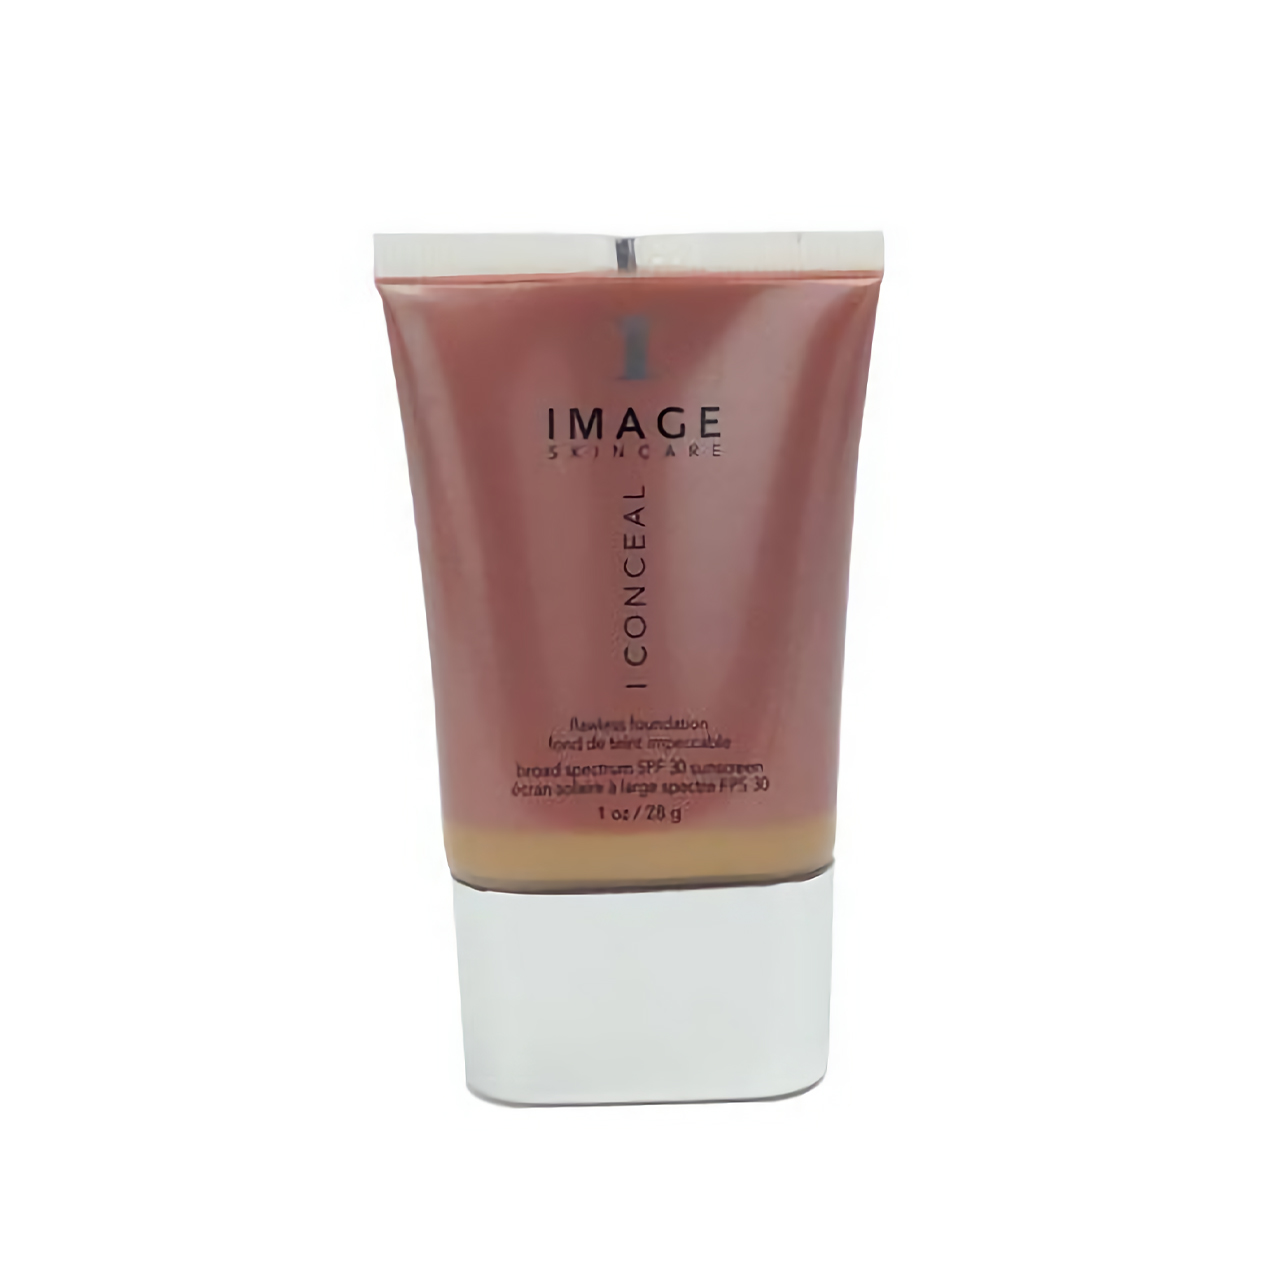 Image Skincare I Conceal Flawless Foundation SPF 30 - 1 oz - Toffee (IC-204N)(01448) Questions & Answers